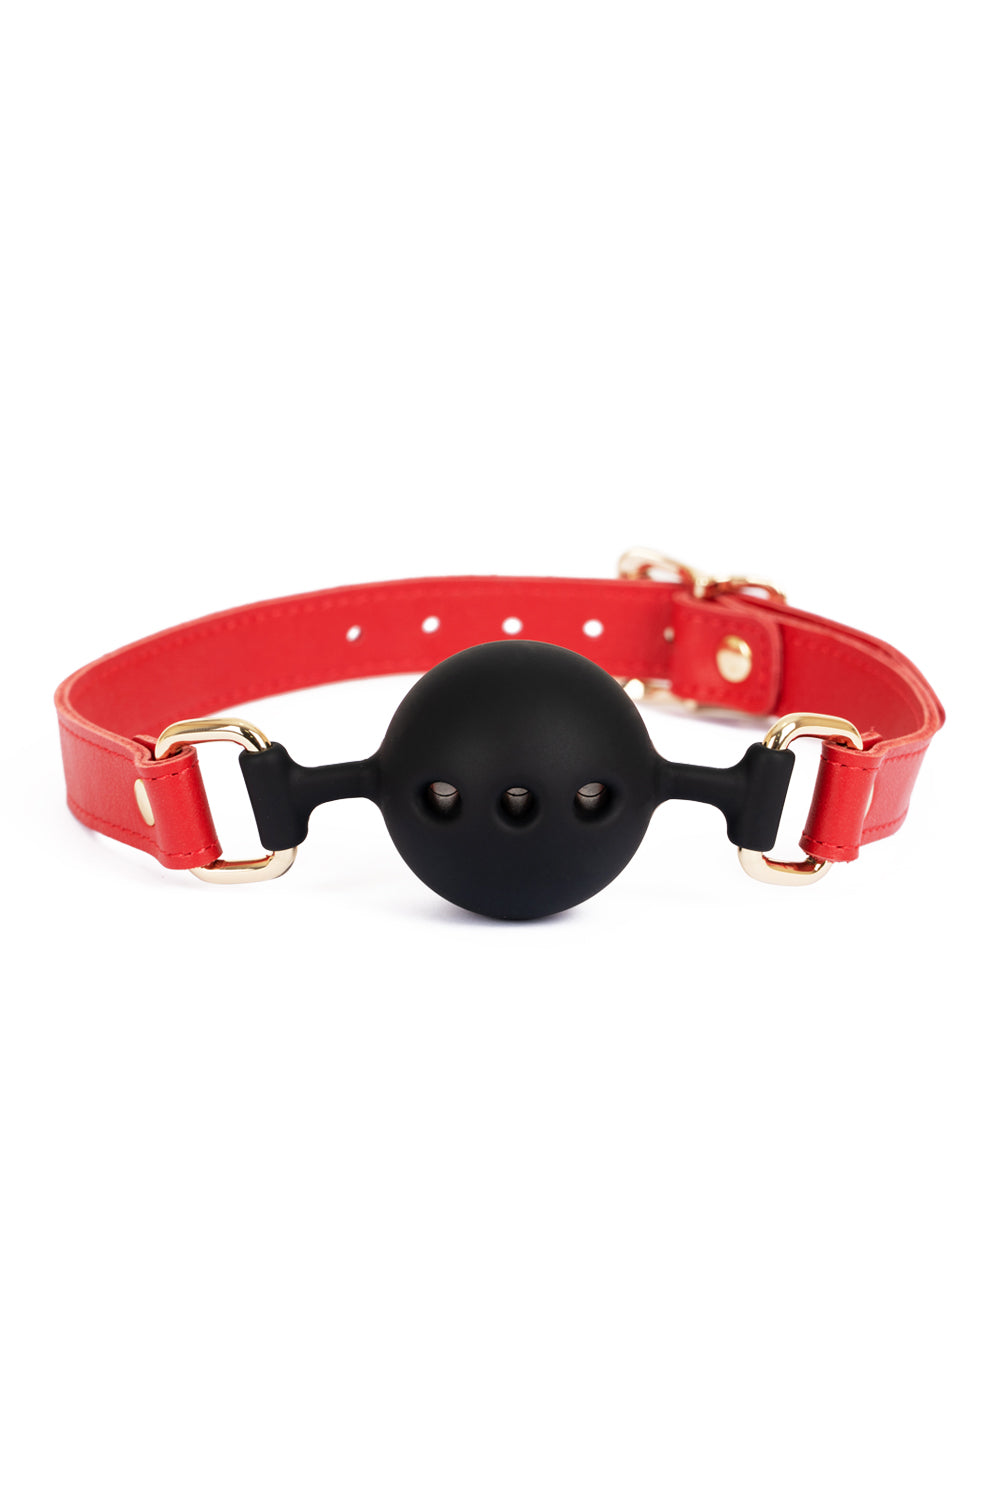 Soft Silicone Mouth Ball Gag. Red